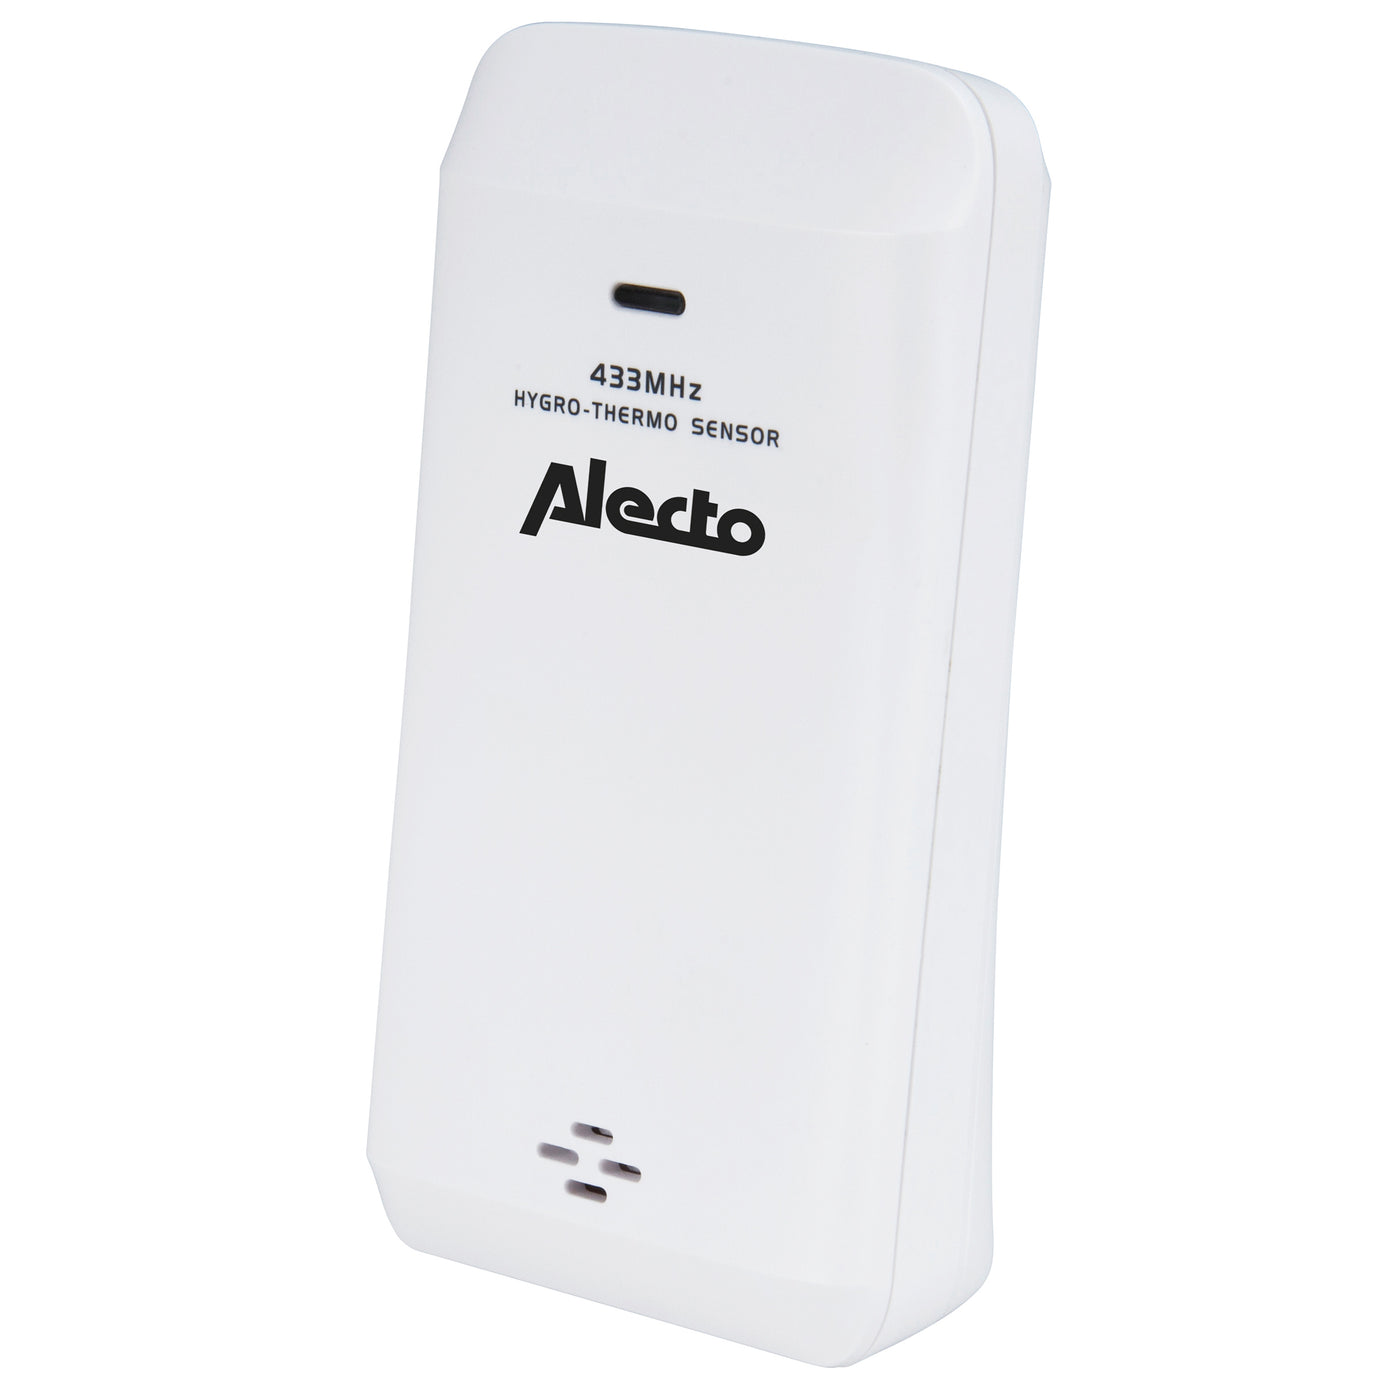 Alecto WS-2500 - Digital alarm clock with weather station